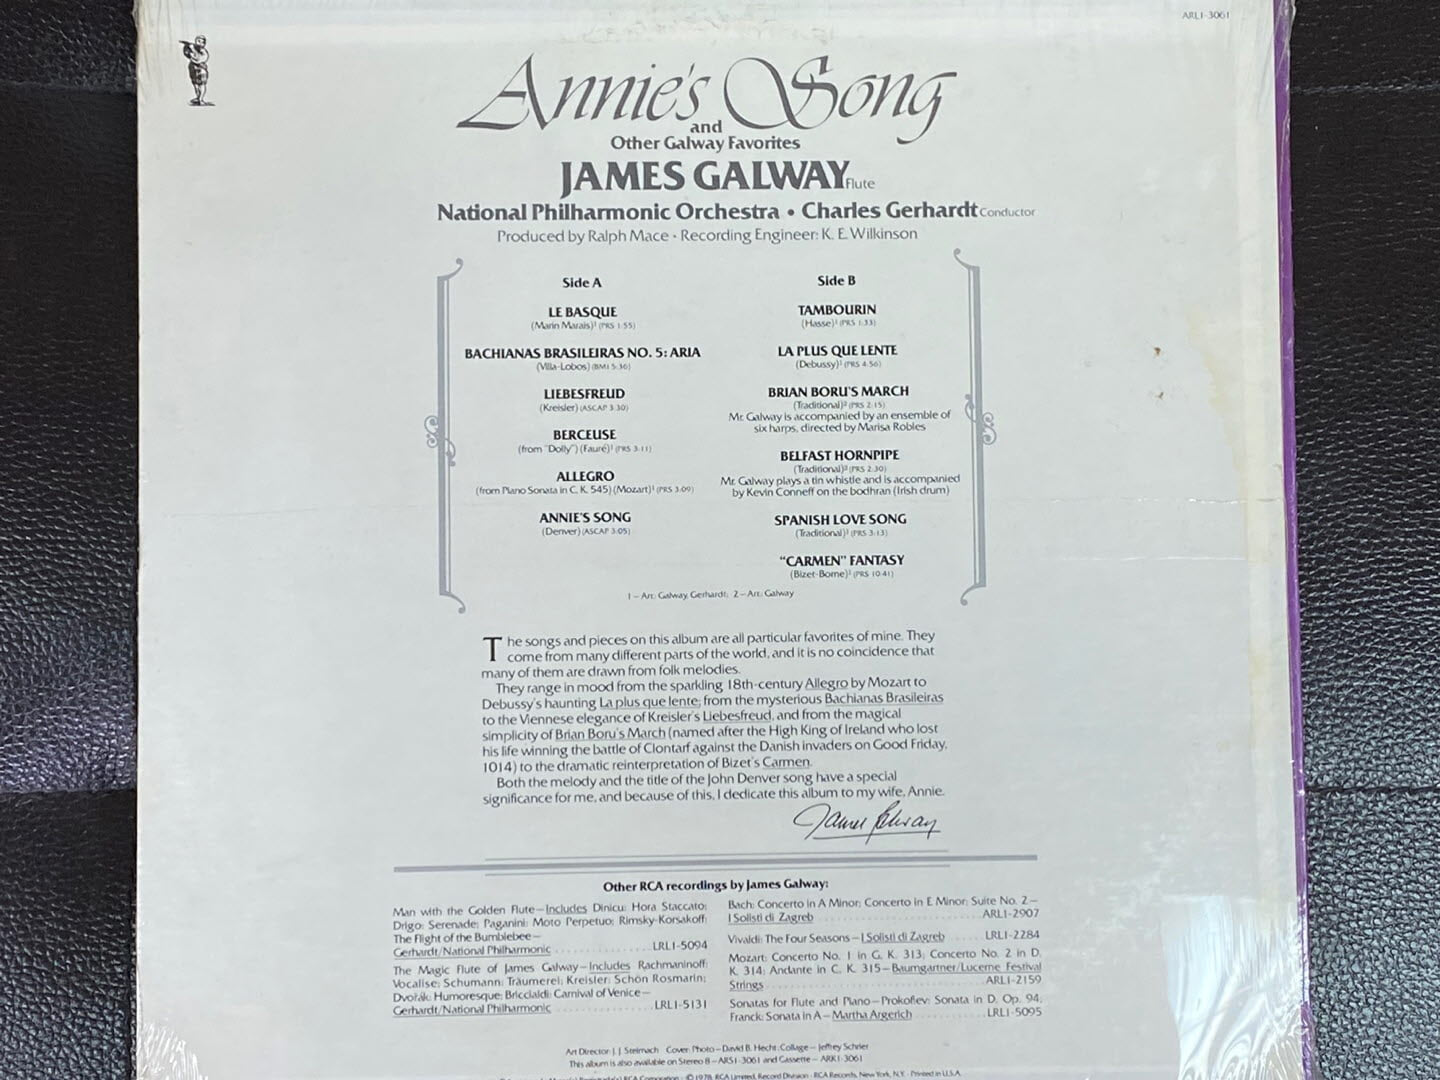 [LP] 제임스 골웨이 - James Galway - Annie's Song and Other Galway Favorites LP [미개봉] [U.S반]